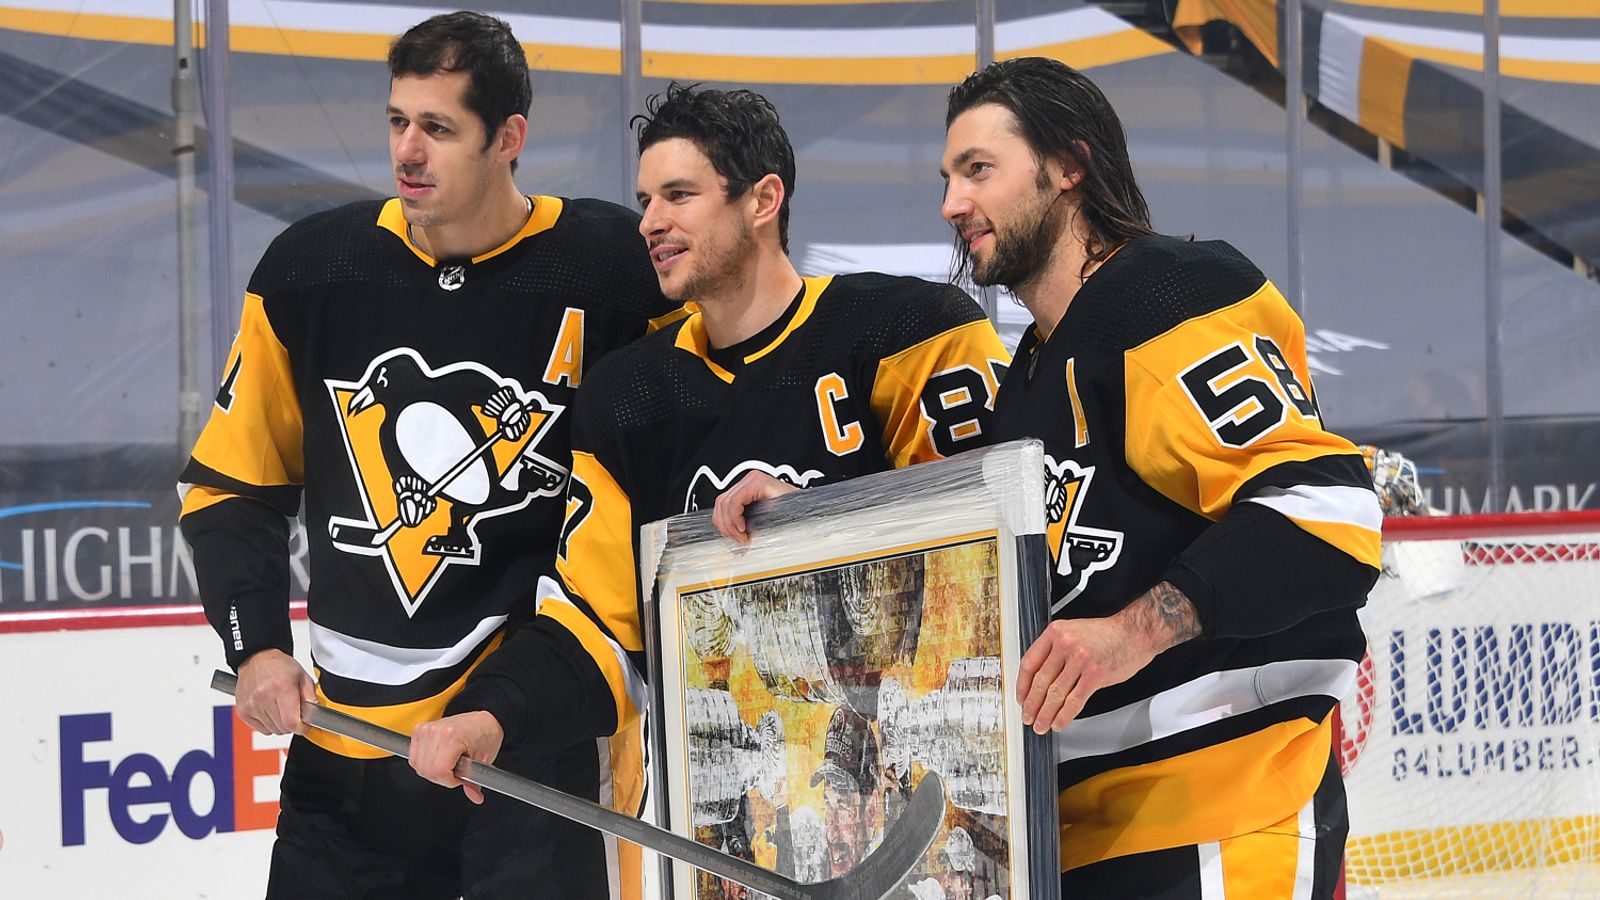 When it comes to Superstitions, Sidney Crosby leads the way here